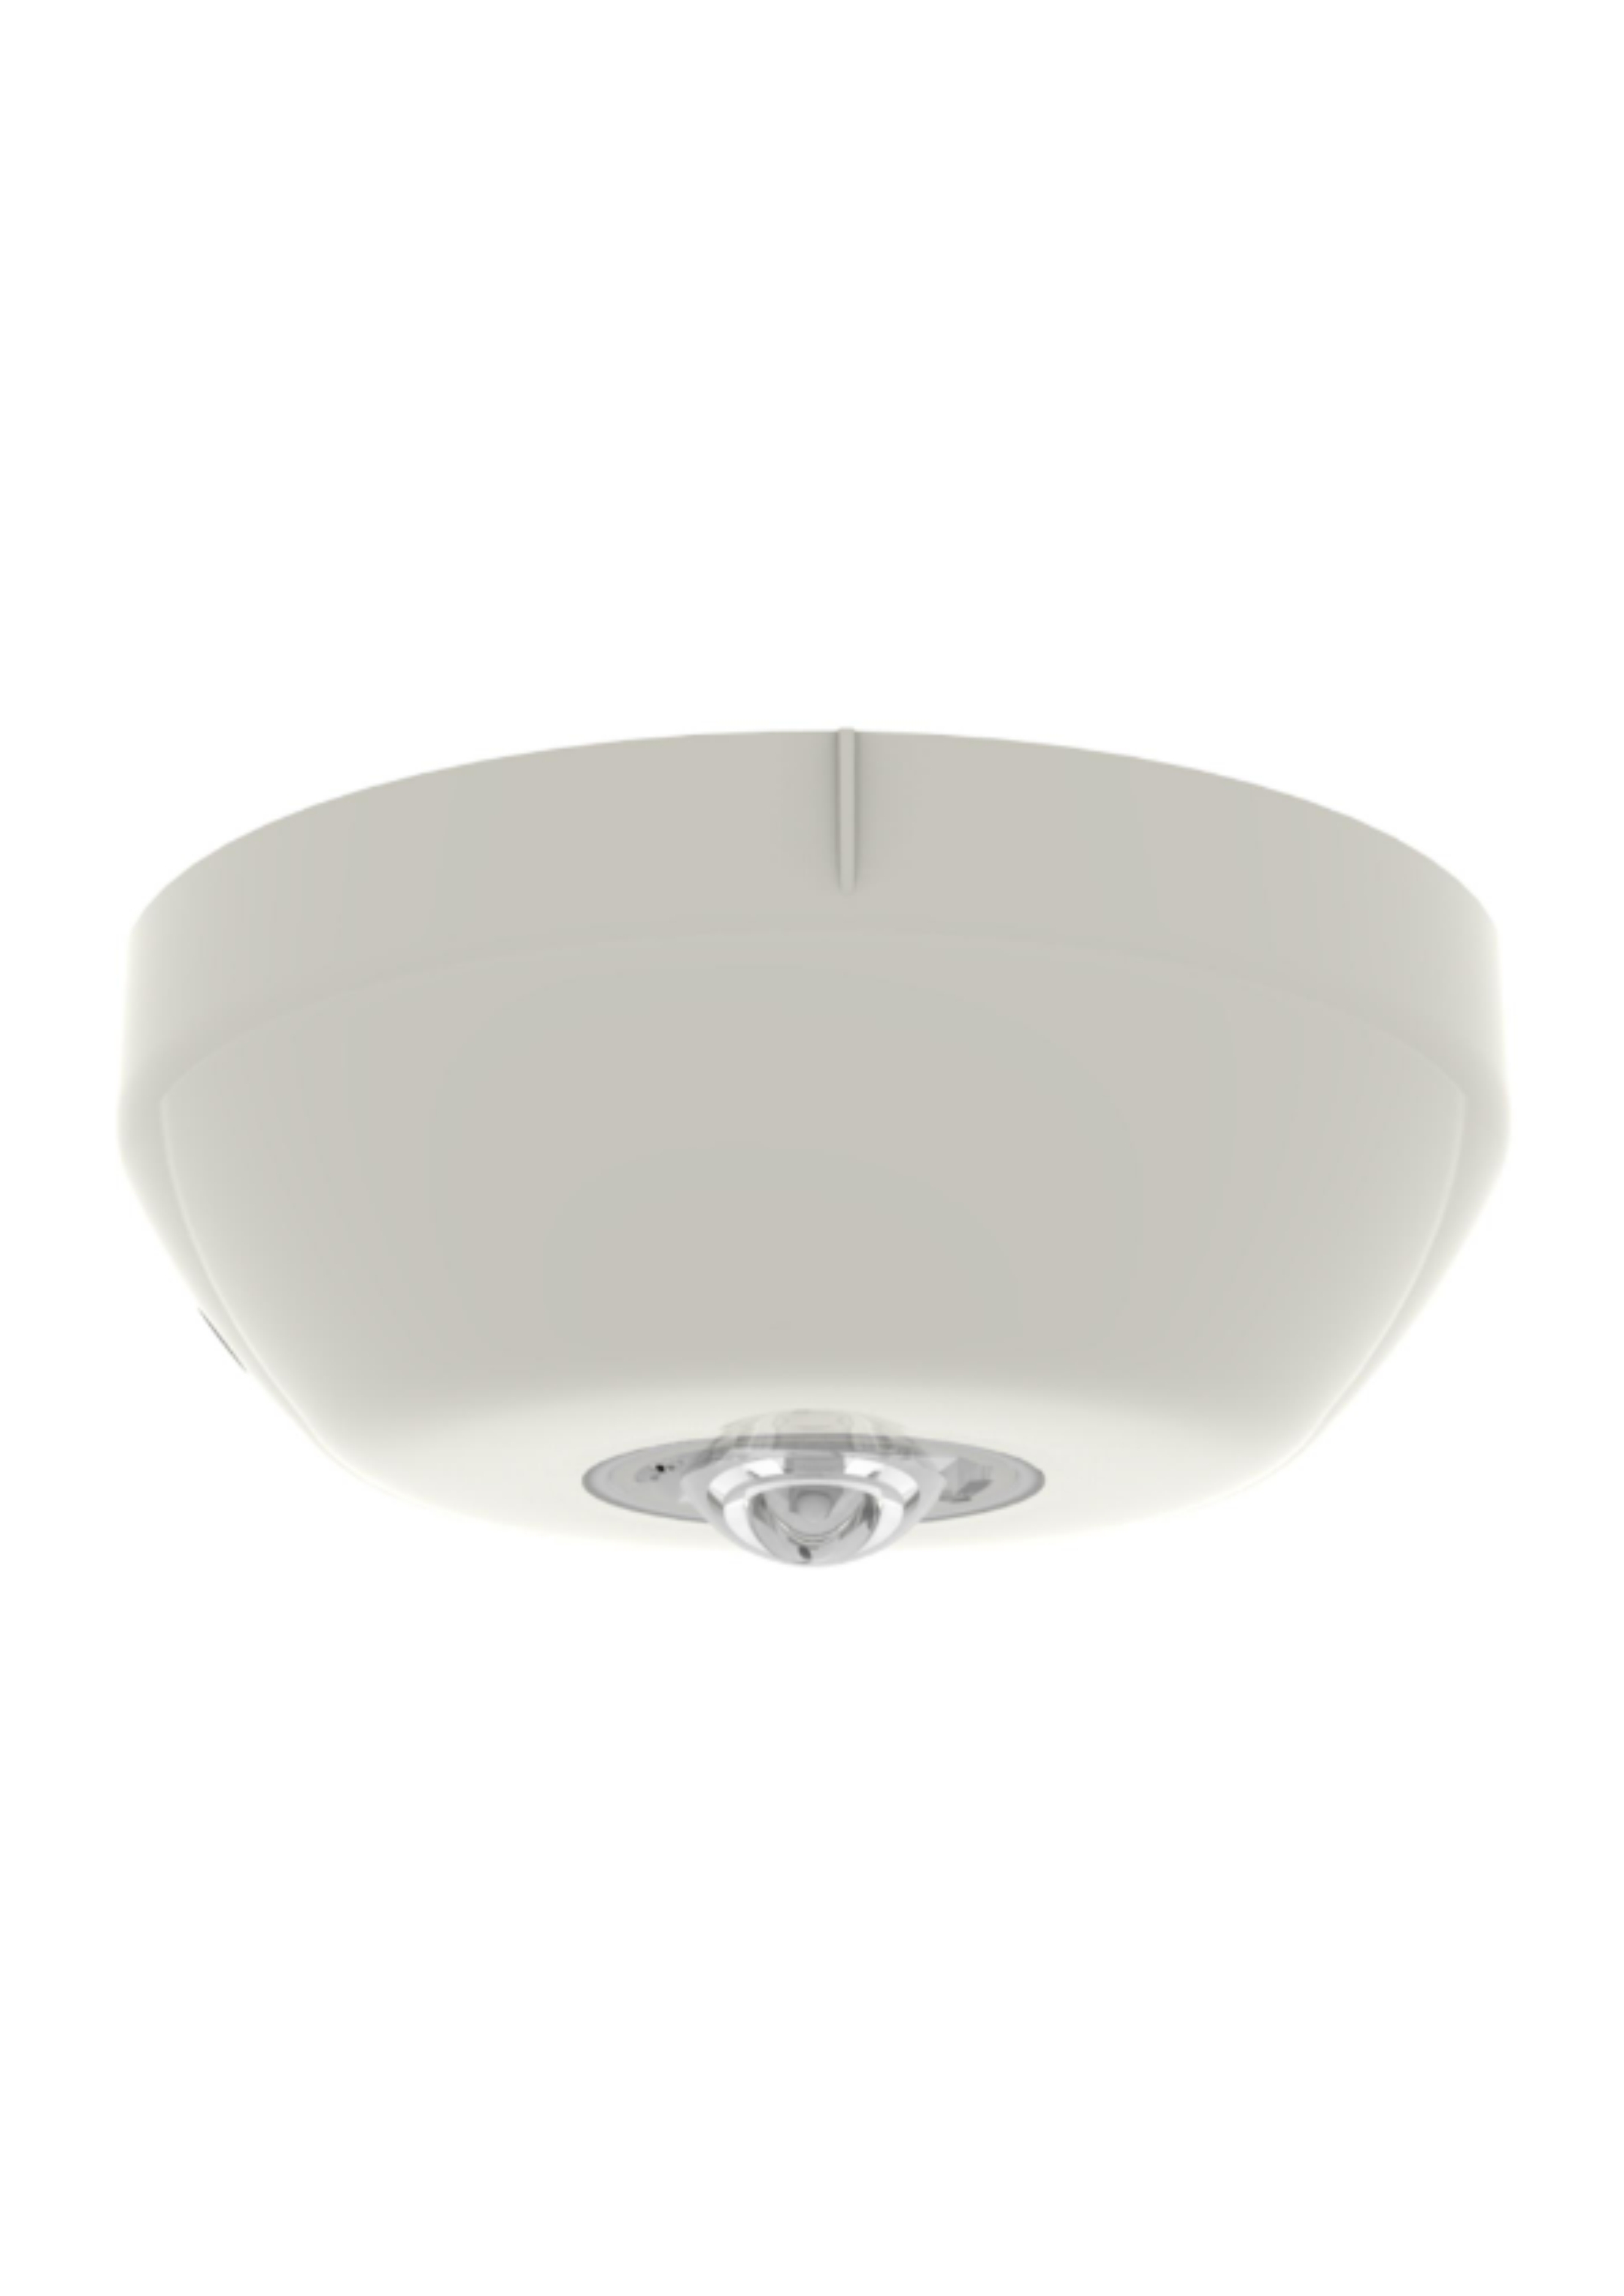 Ceiling Beacon - Ivory case, red LEDs (7.5m) 14602...